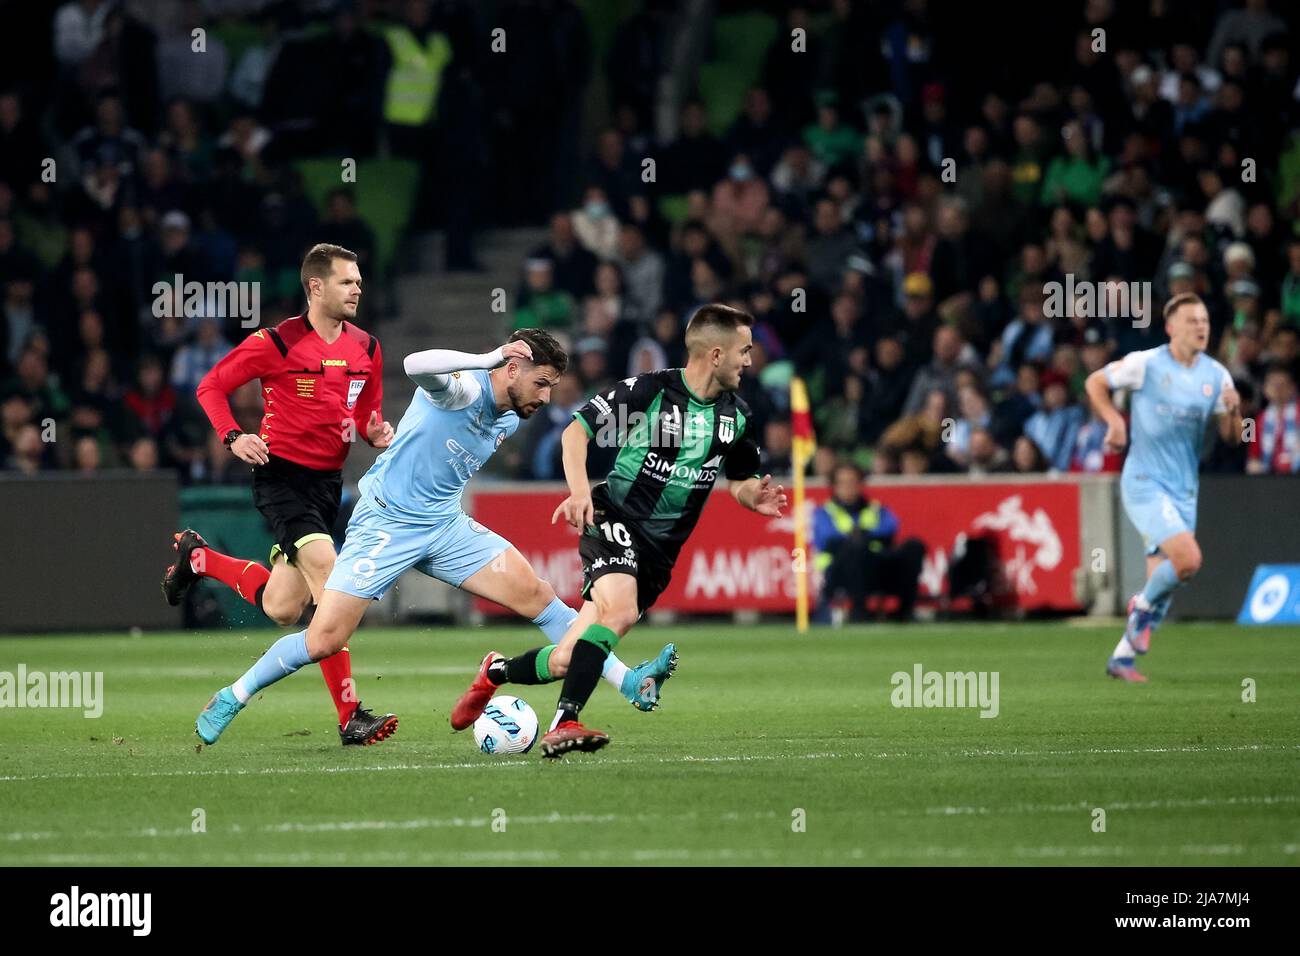 Melbourne, Australia, 28 May, 2022. Mathew Leckie of Melbourne City FC controls the ball during the A-League Grand Final soccer match between Melbourne City FC and Western United at AAMI Park on May 28, 2022 in Melbourne, Australia. Credit: Dave Hewison/Speed Media/Alamy Live News Stock Photo